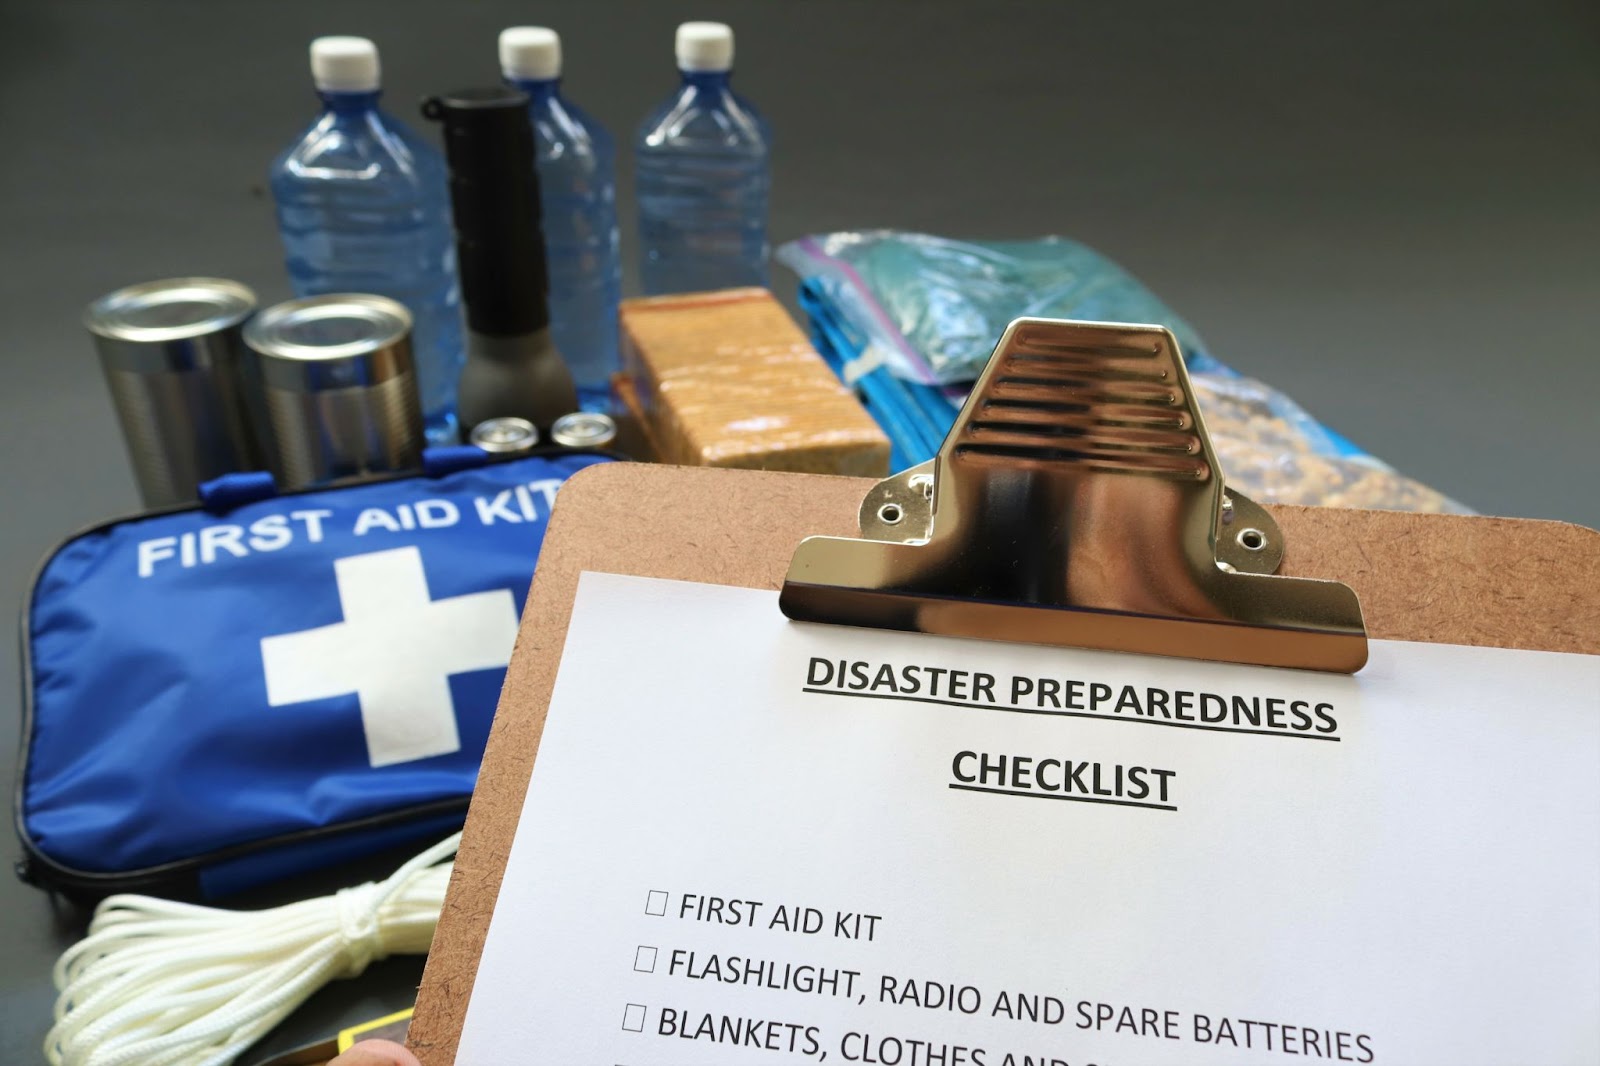 Checklist for disaster preparedness including natural disasters, emergency situations.